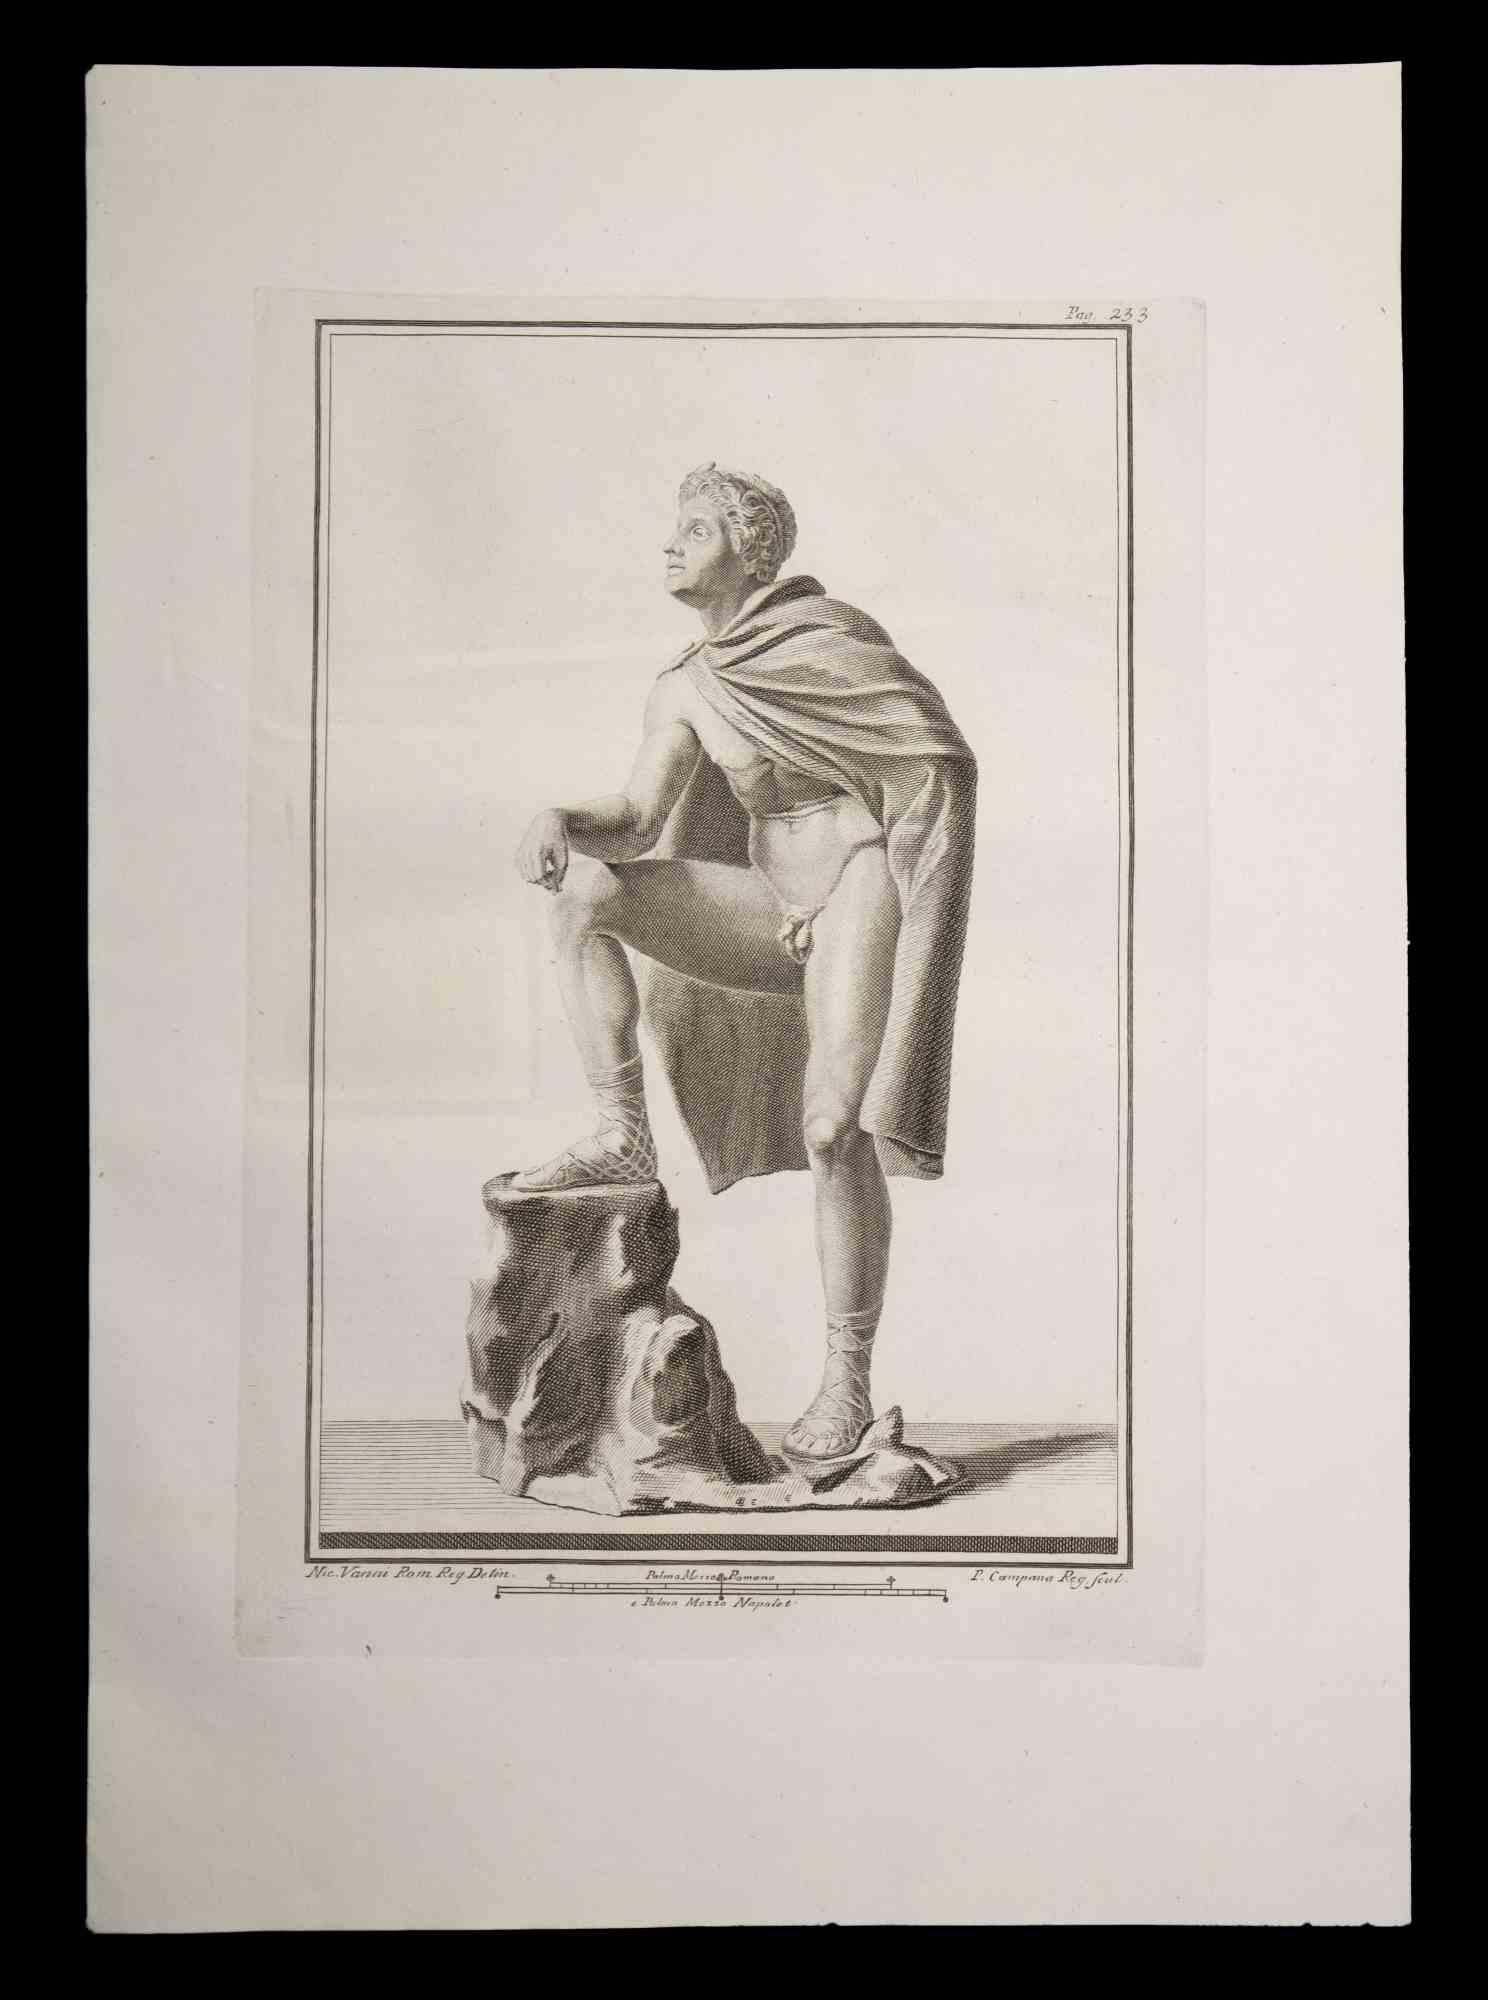 Ancient Roman Statue, from the series "Antiquities of Herculaneum", is an original etching on paper realized by P. Campana in the 18th century.

Signed on the plate, on the lower right.

Good conditions with slight folding.

The etching belongs to